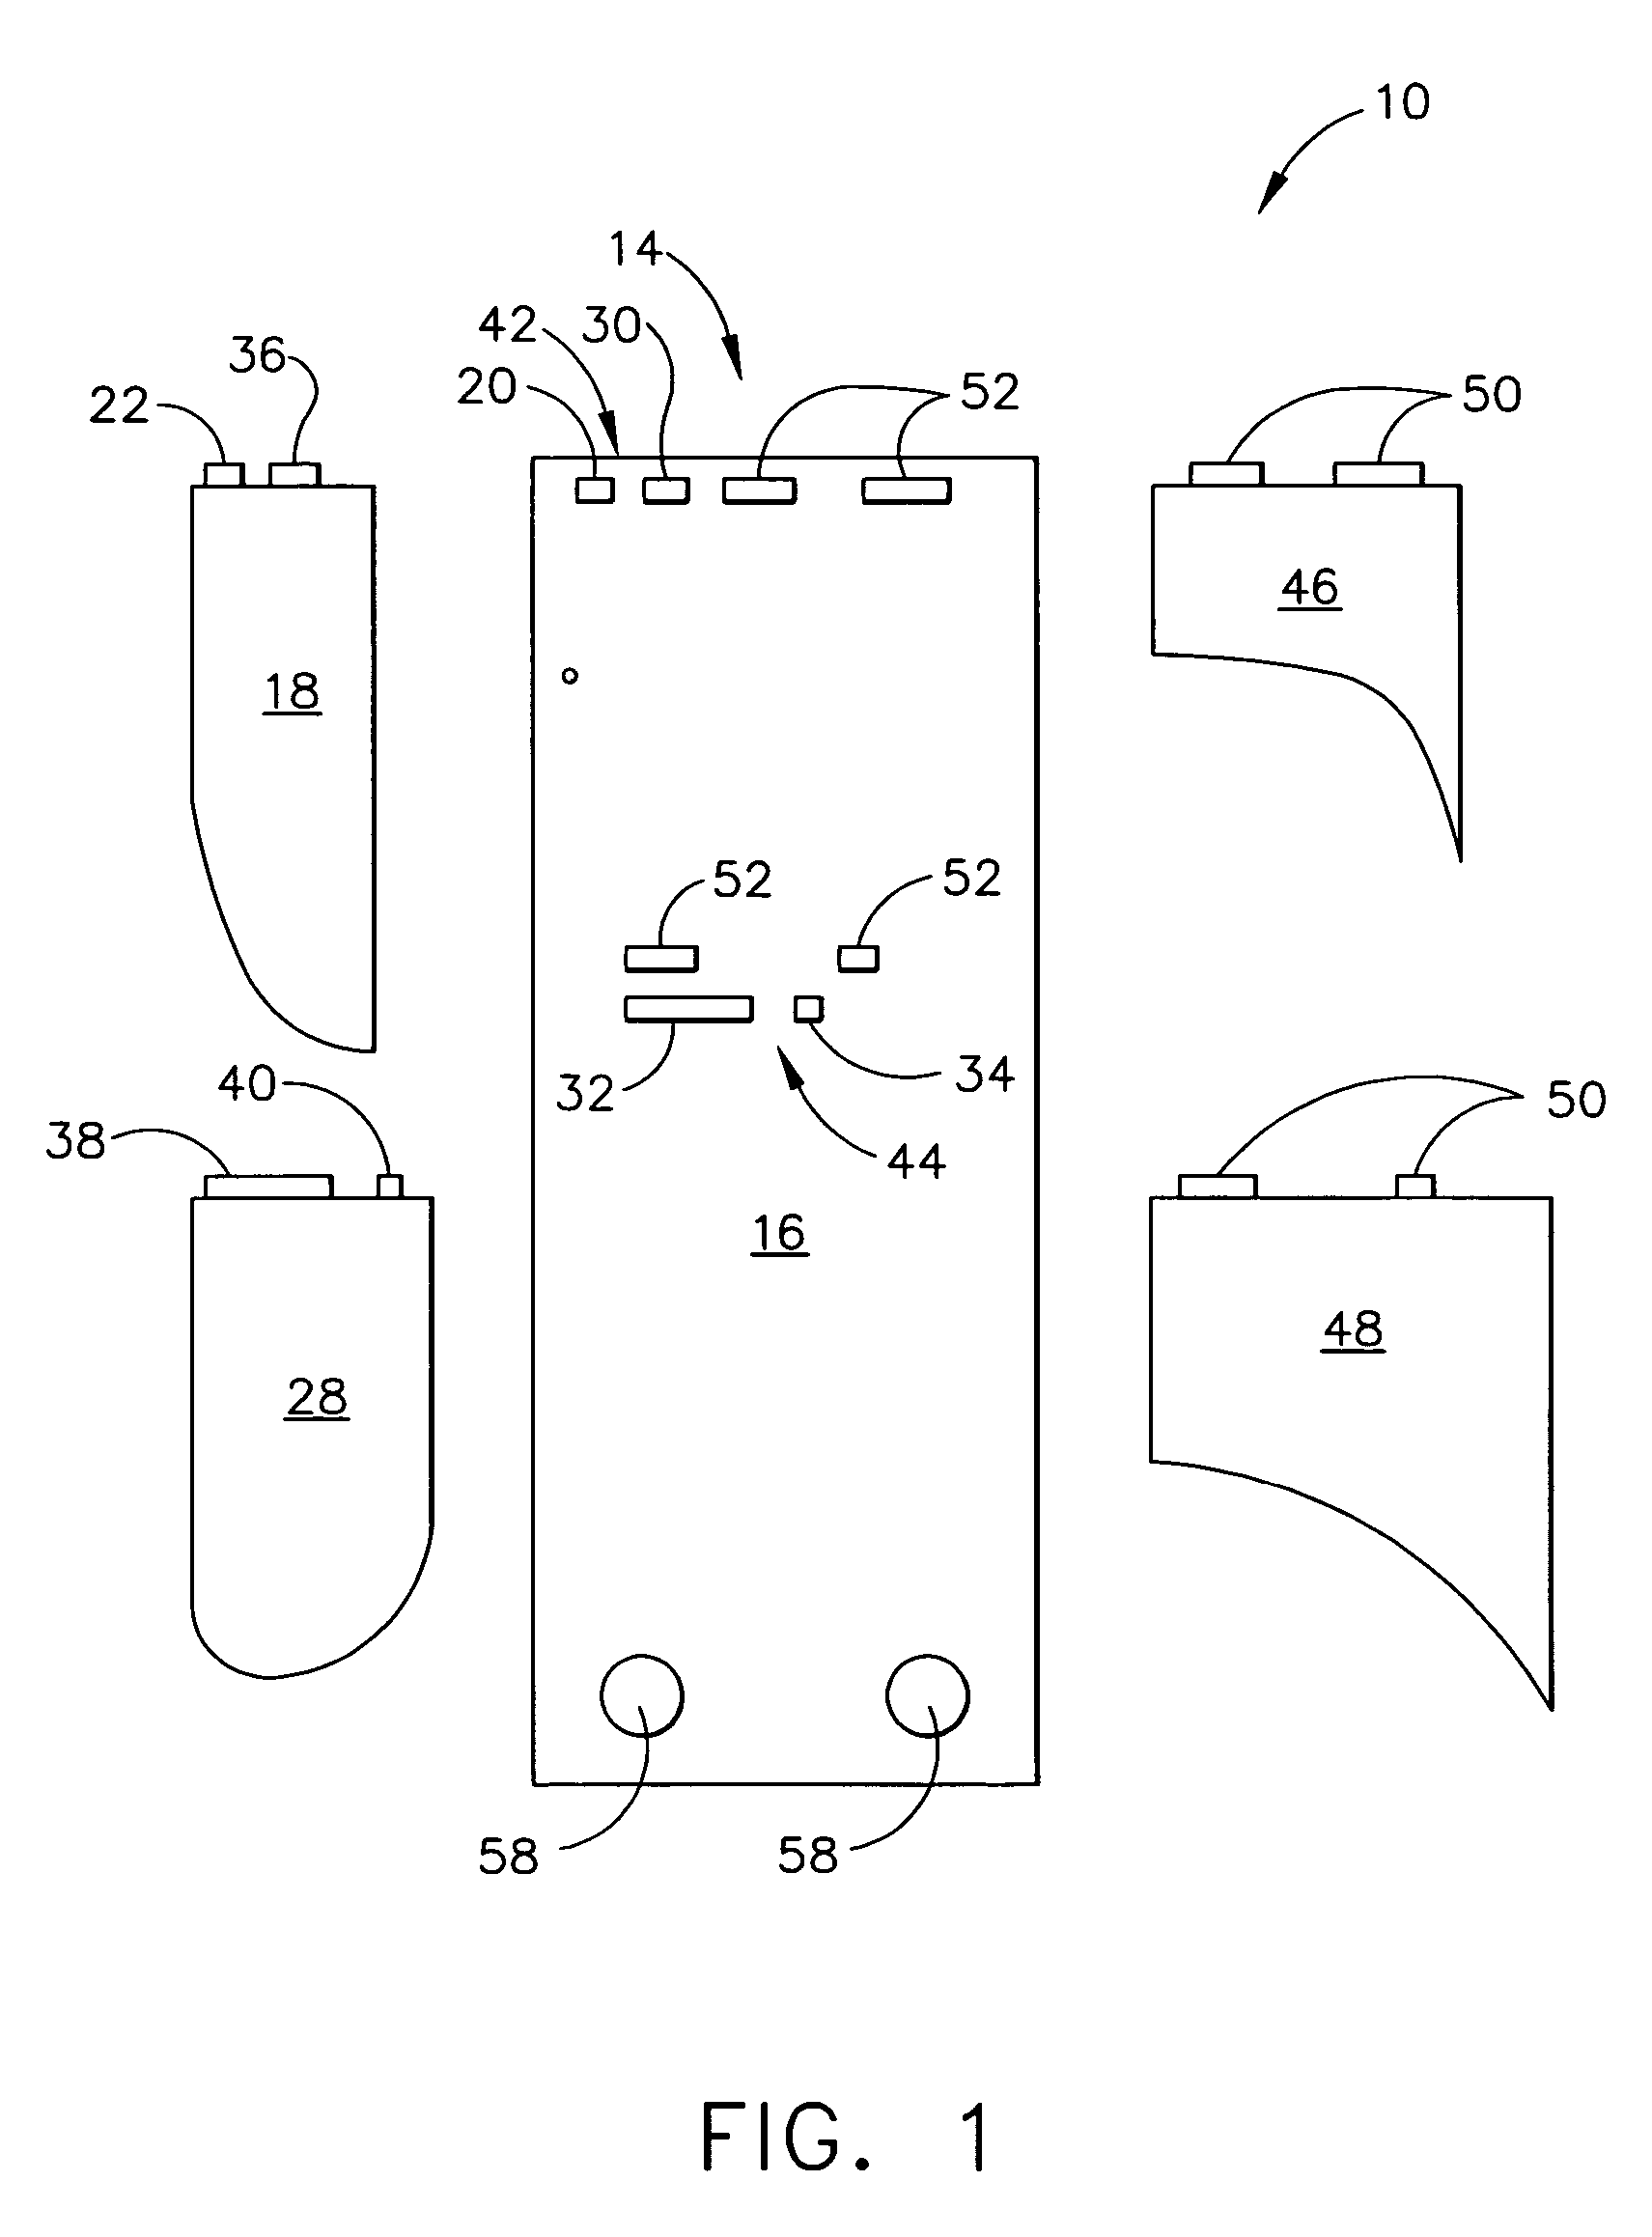 Electroplating apparatus and method for making an electroplating anode assembly